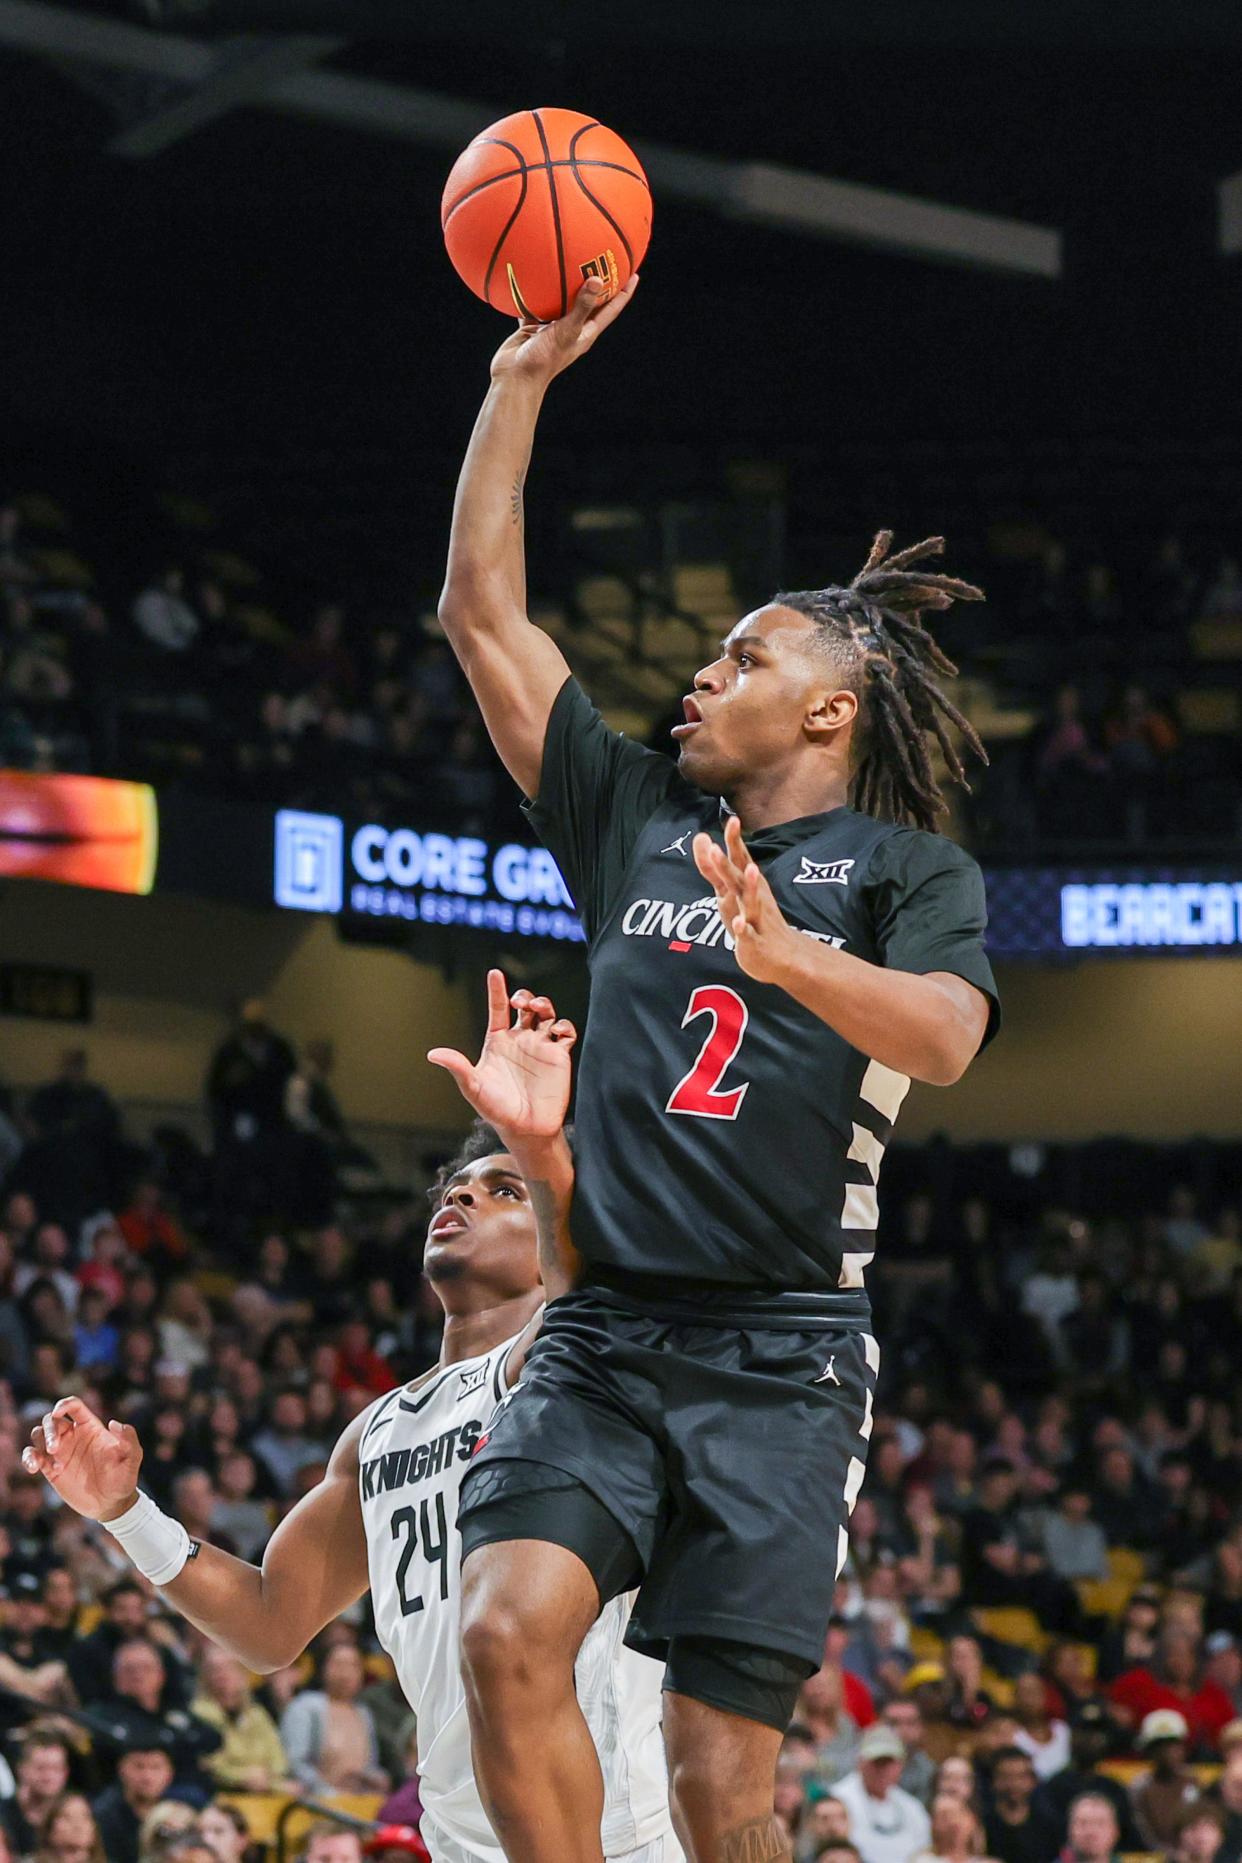 UC guard Jizzle James had seven points and one assist and played in the critical final minutes after Day Day Thomas fouled out.